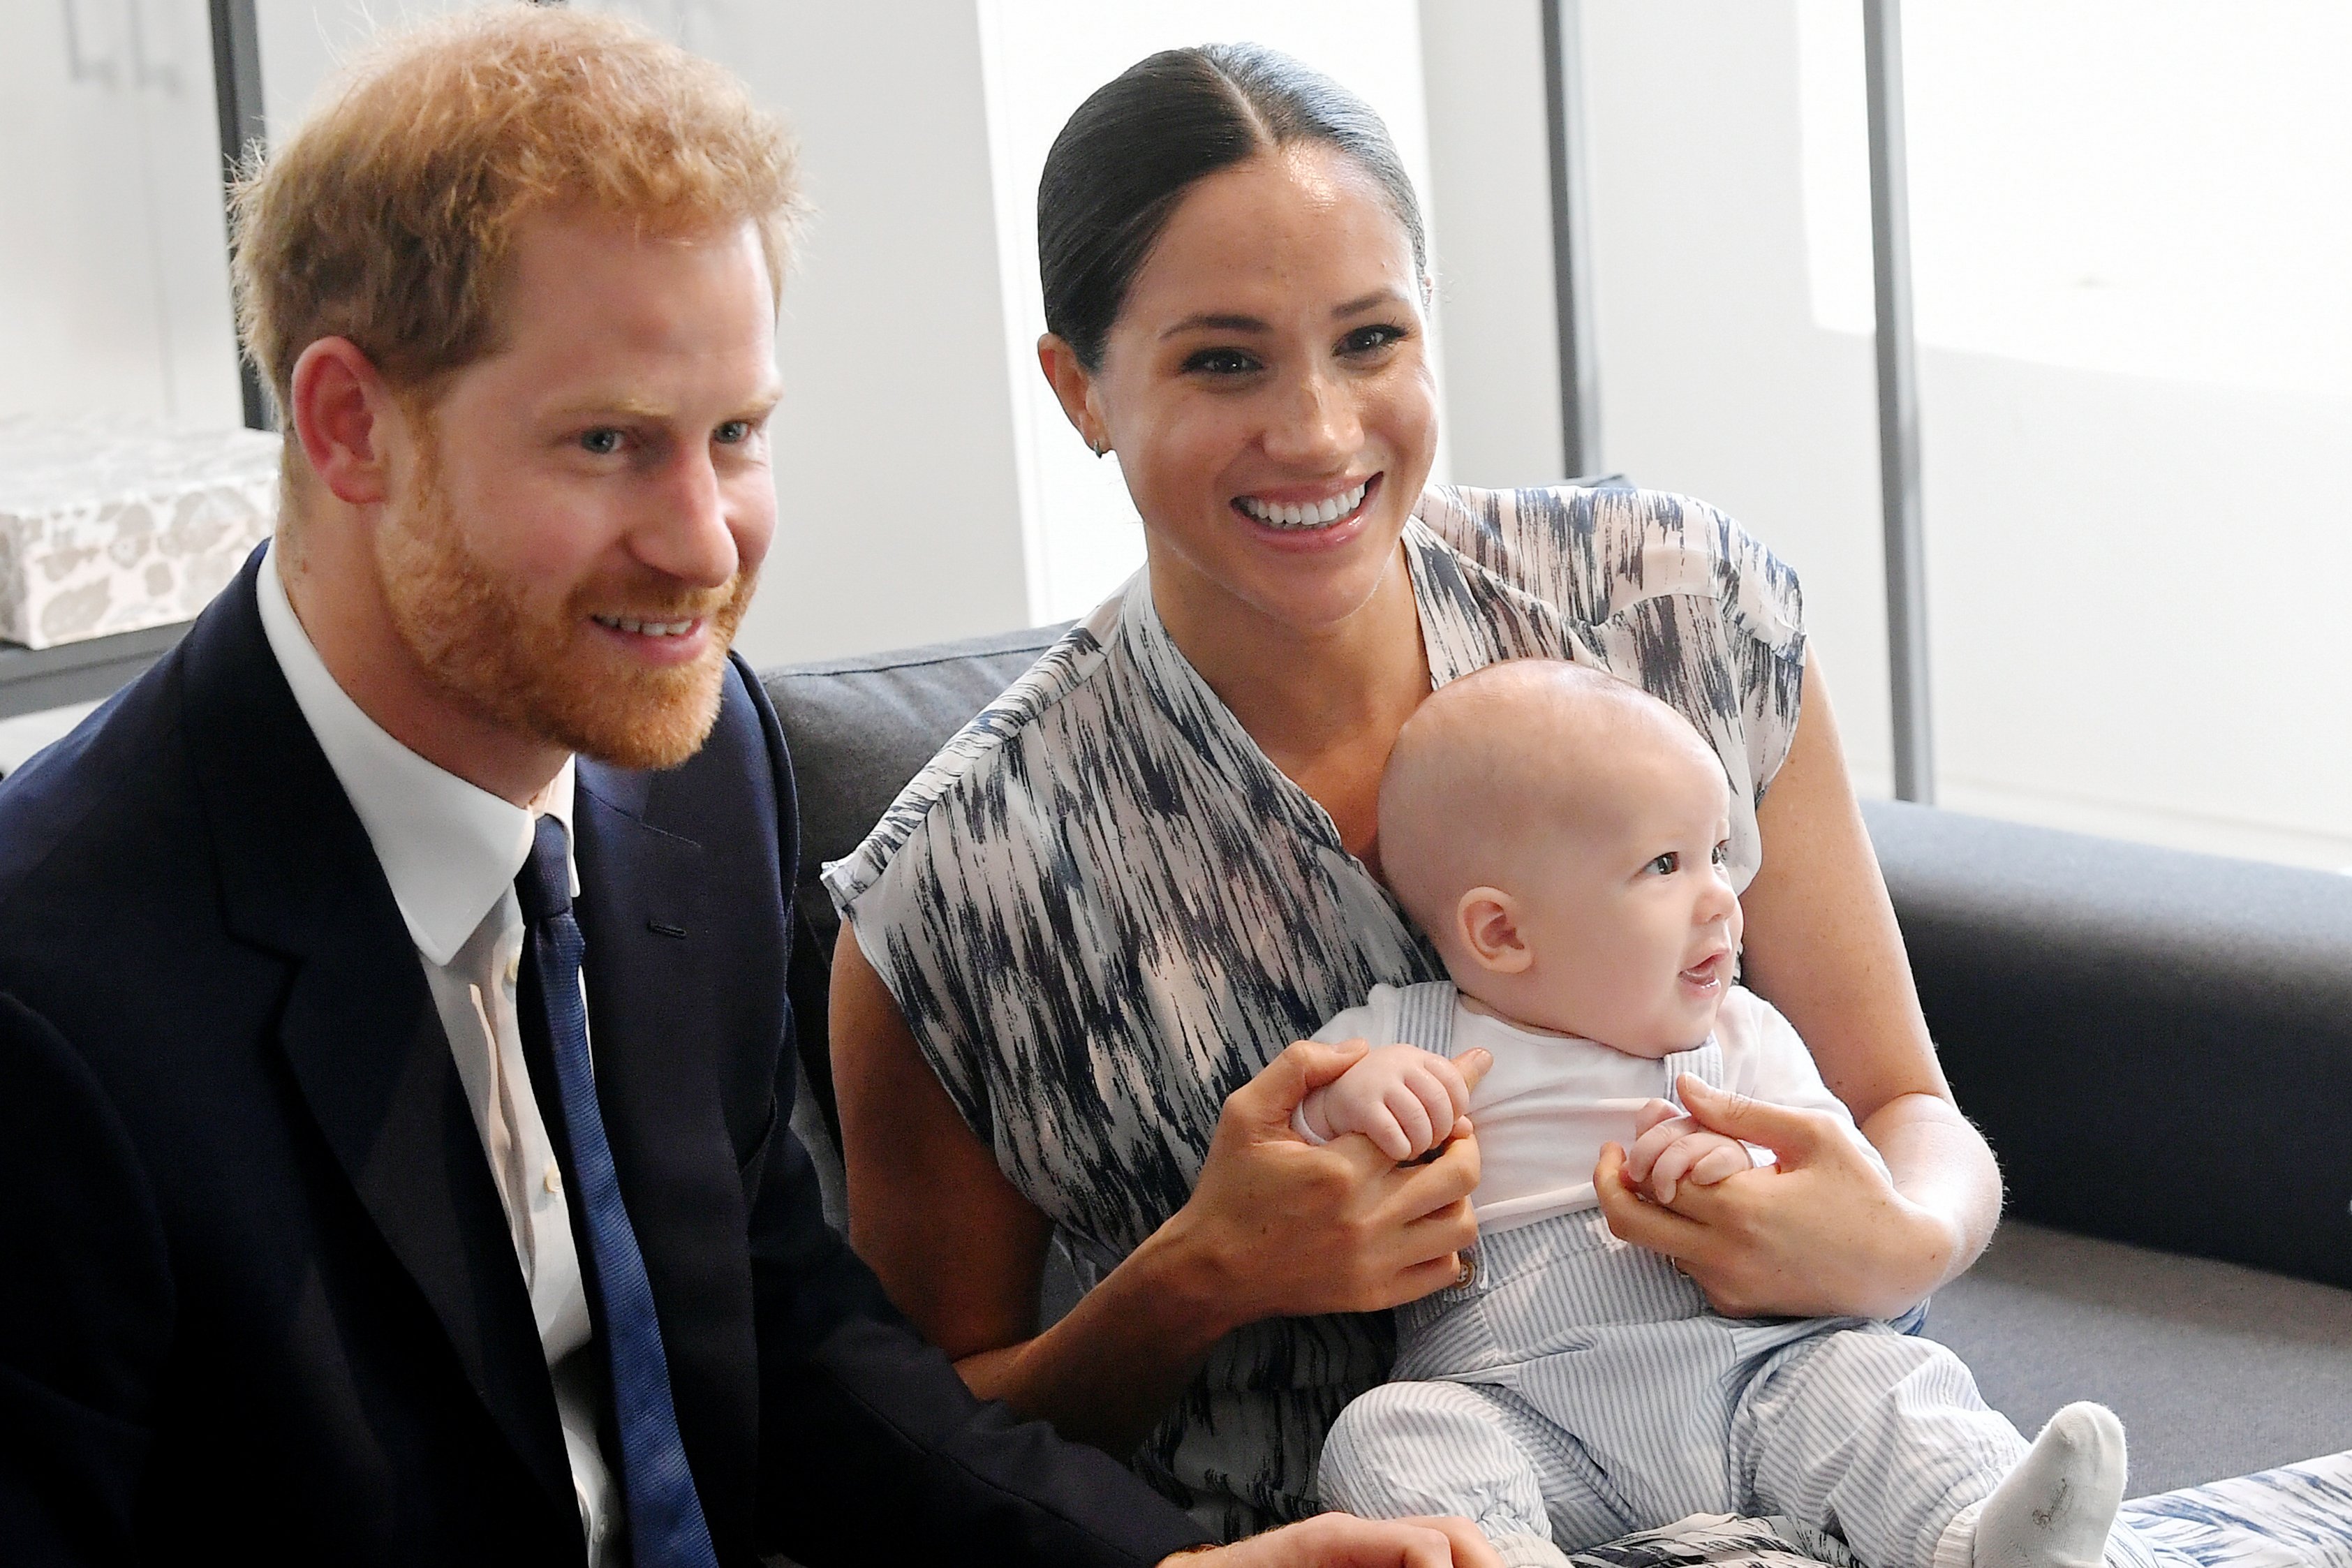 Prince Harry, Meghan, and their baby son Archie Mountbatten-Windsor during their royal tour of South Africa on September 25, 2019, in Cape Town, South Africa. | Source: Getty Images.